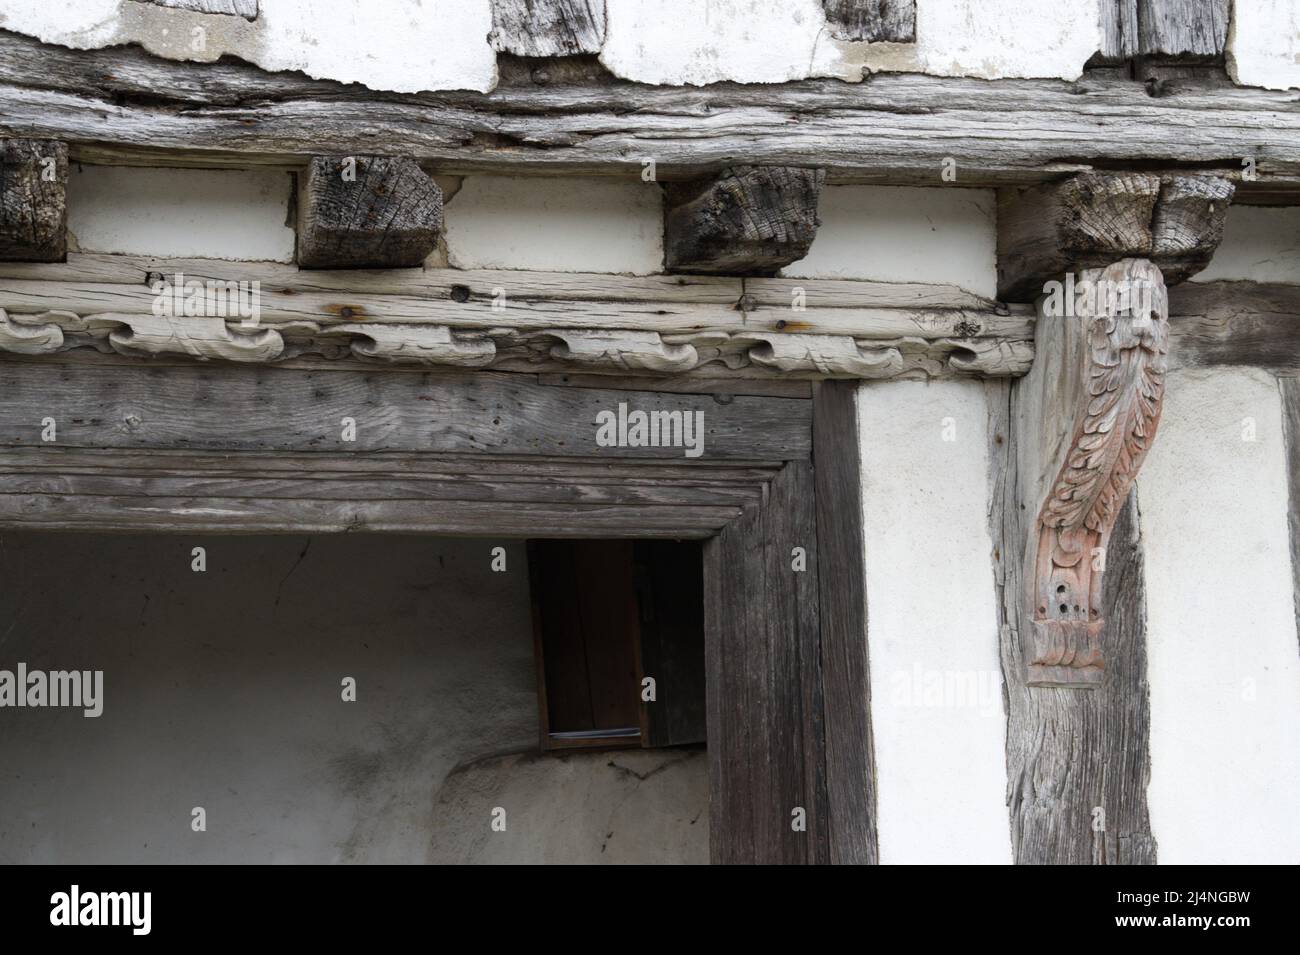 Exterior of an old, delapidated timber framed house Stock Photo